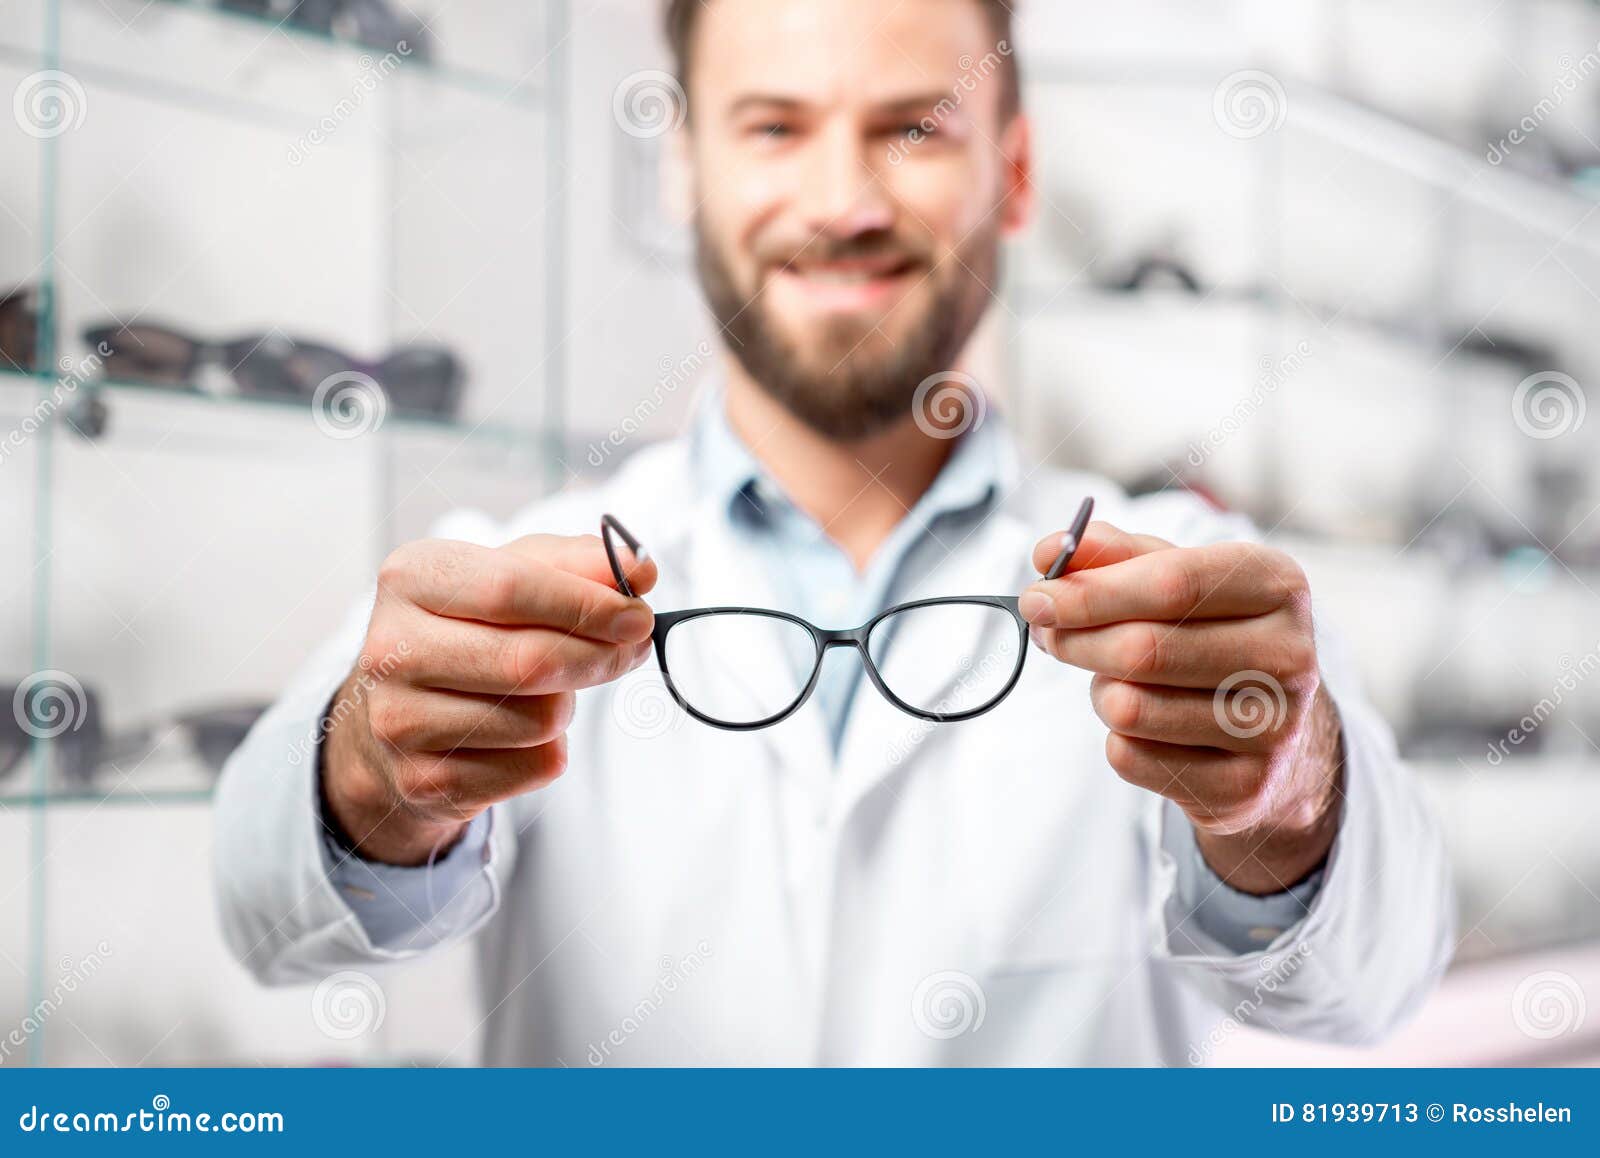 Ophthalmologist with Eyeglasses Stock Image - Image of concept, medical ...